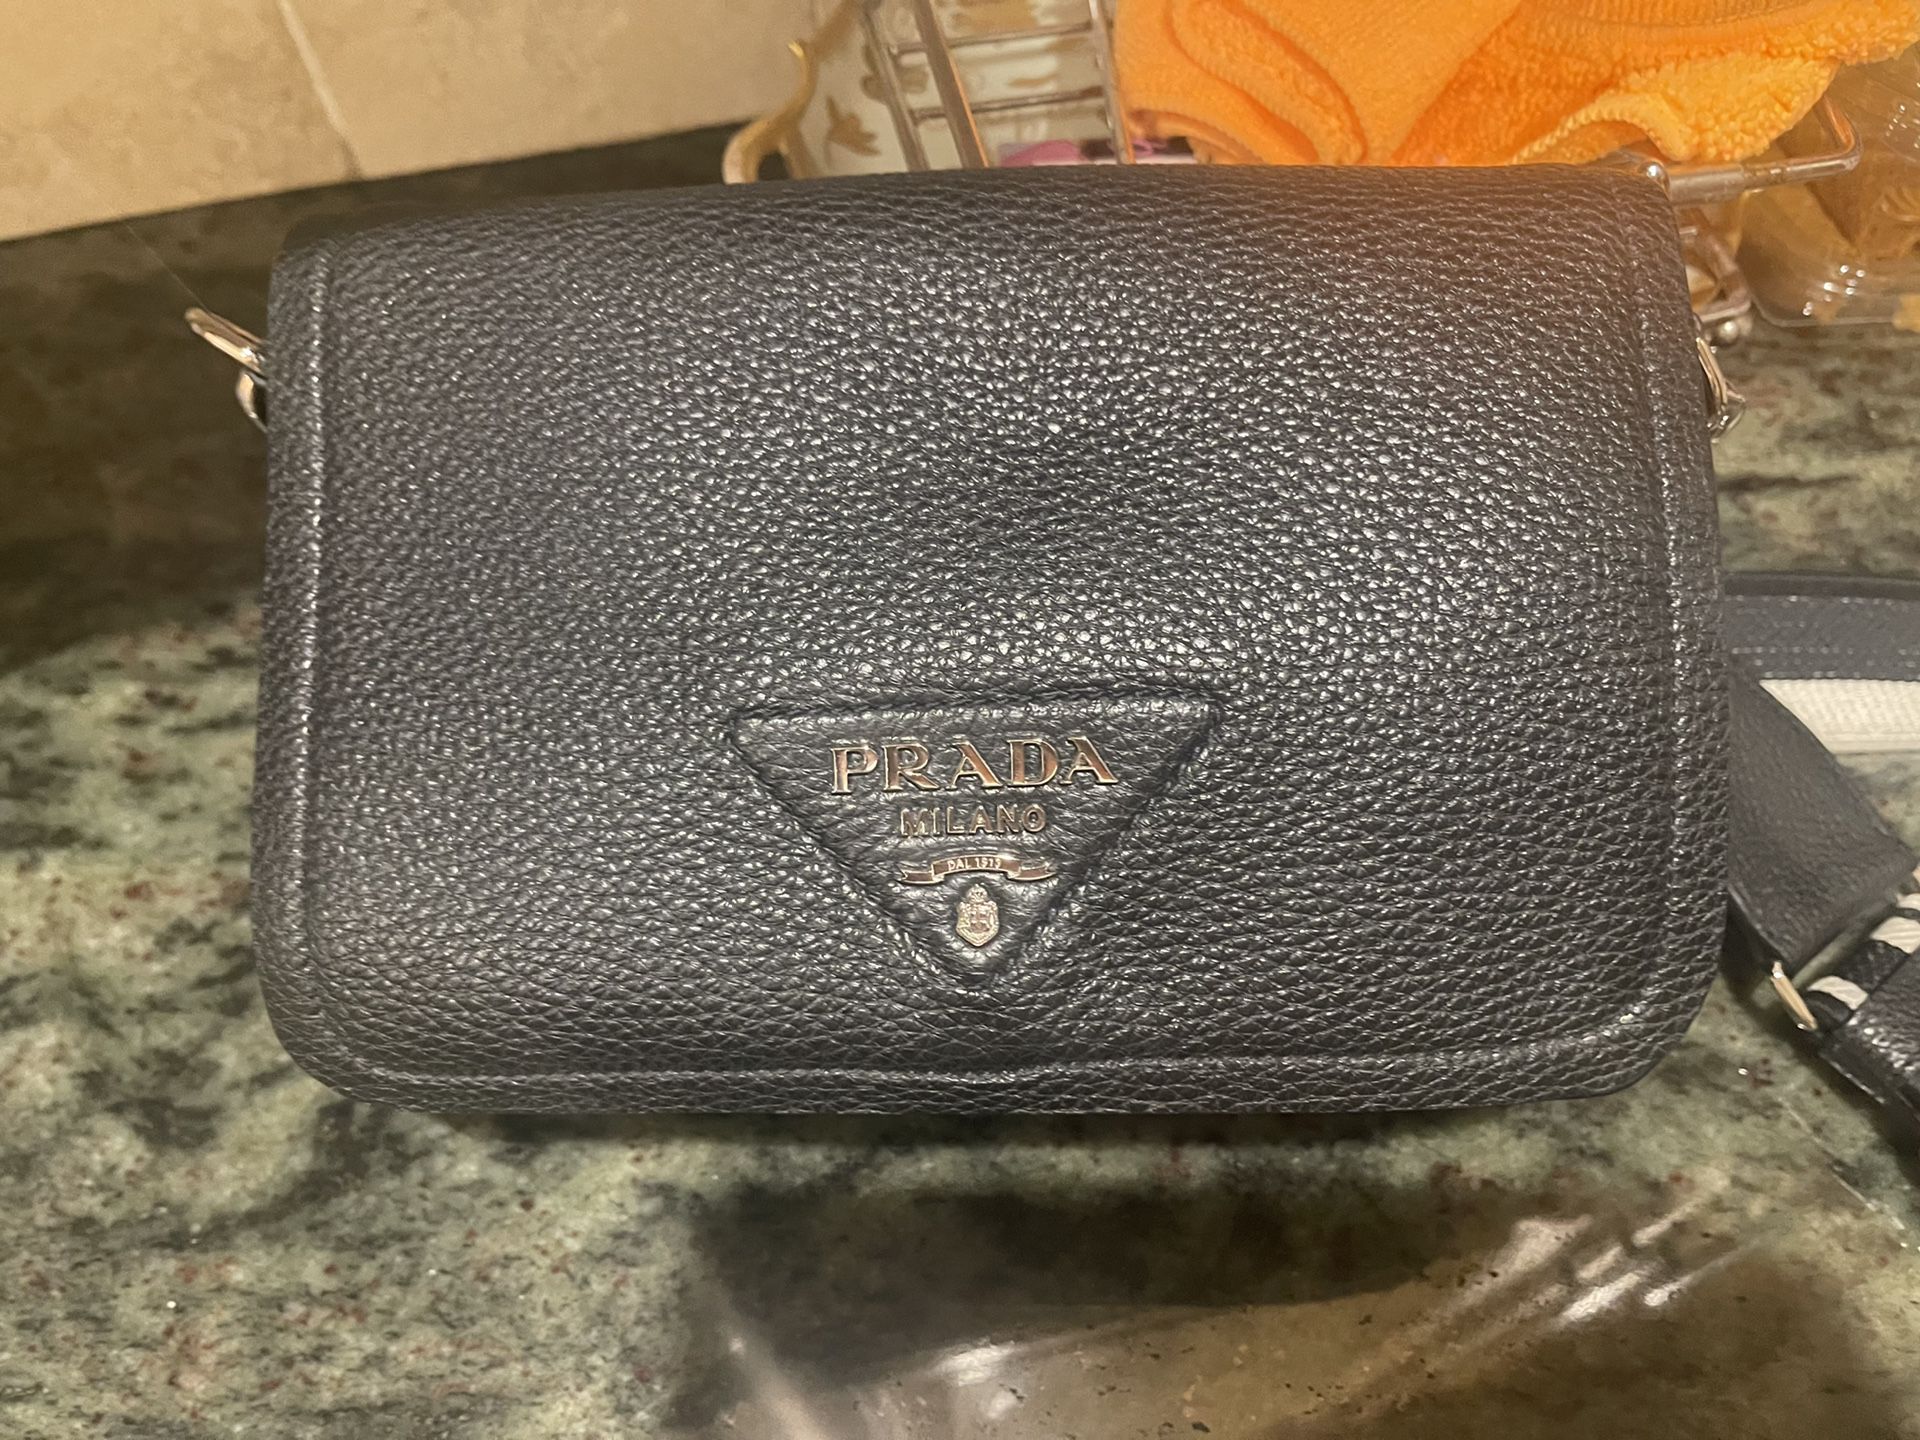 Dereon Purse for Sale in Fontana, CA - OfferUp